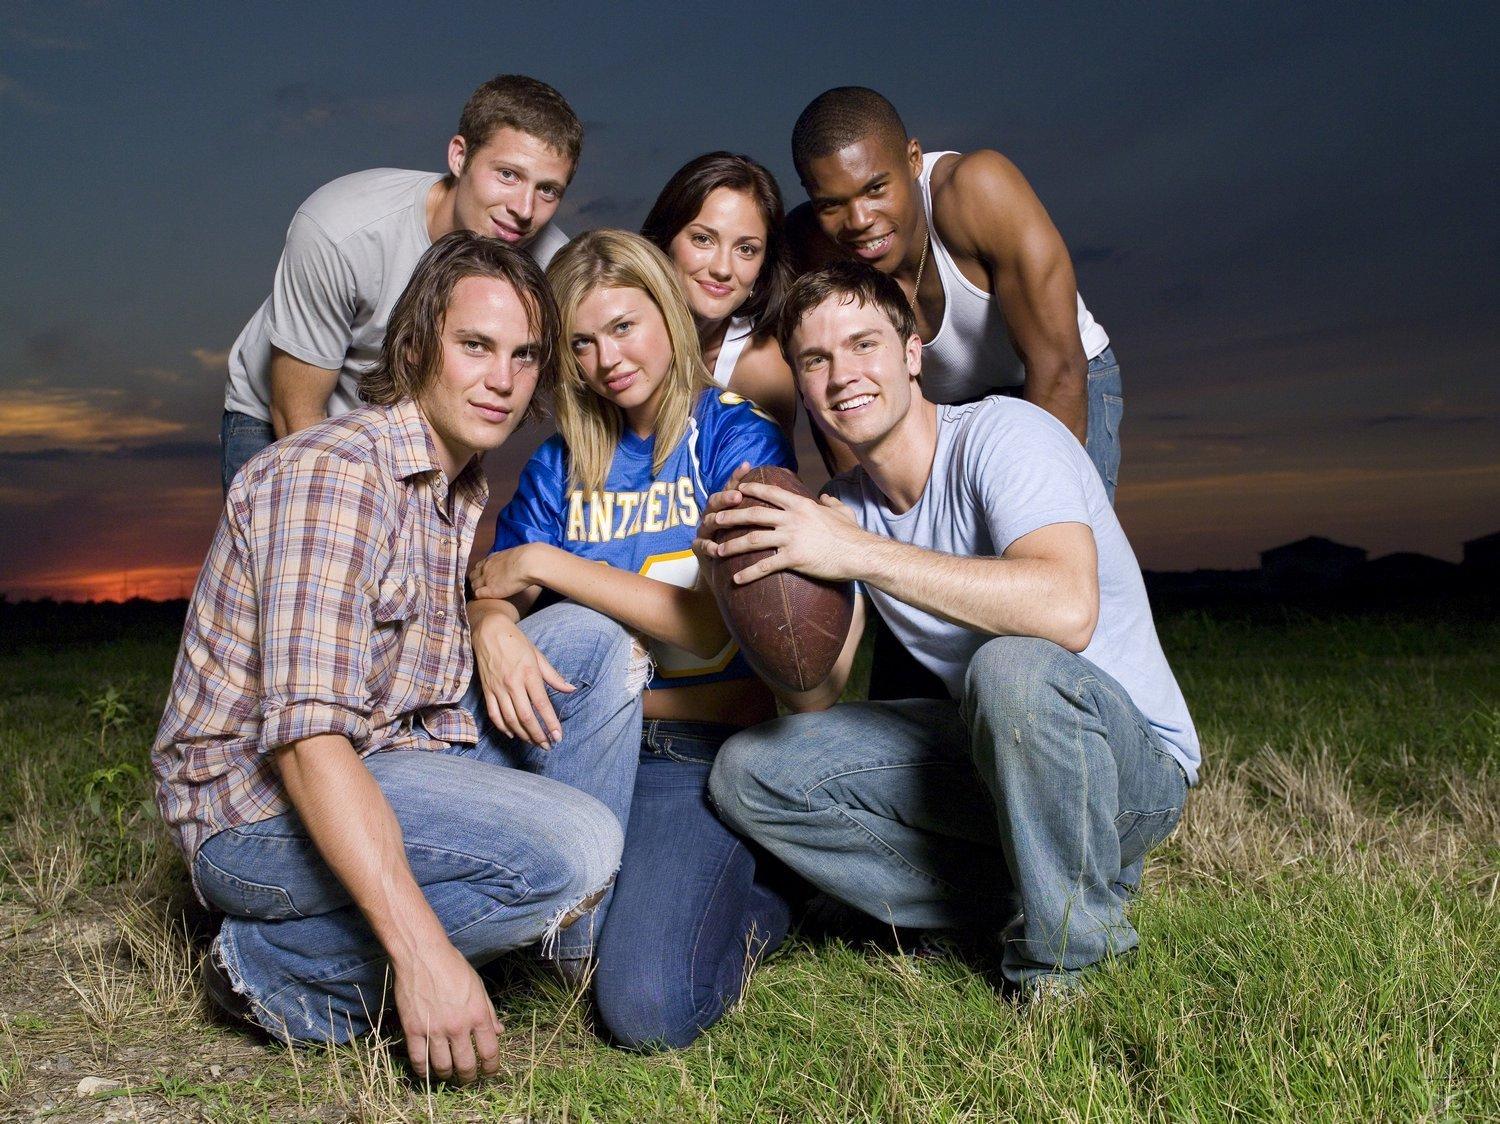 Friday Night Lights Season 5 Spoilers - The 5 Best 5 Worst Episodes Of Frid...